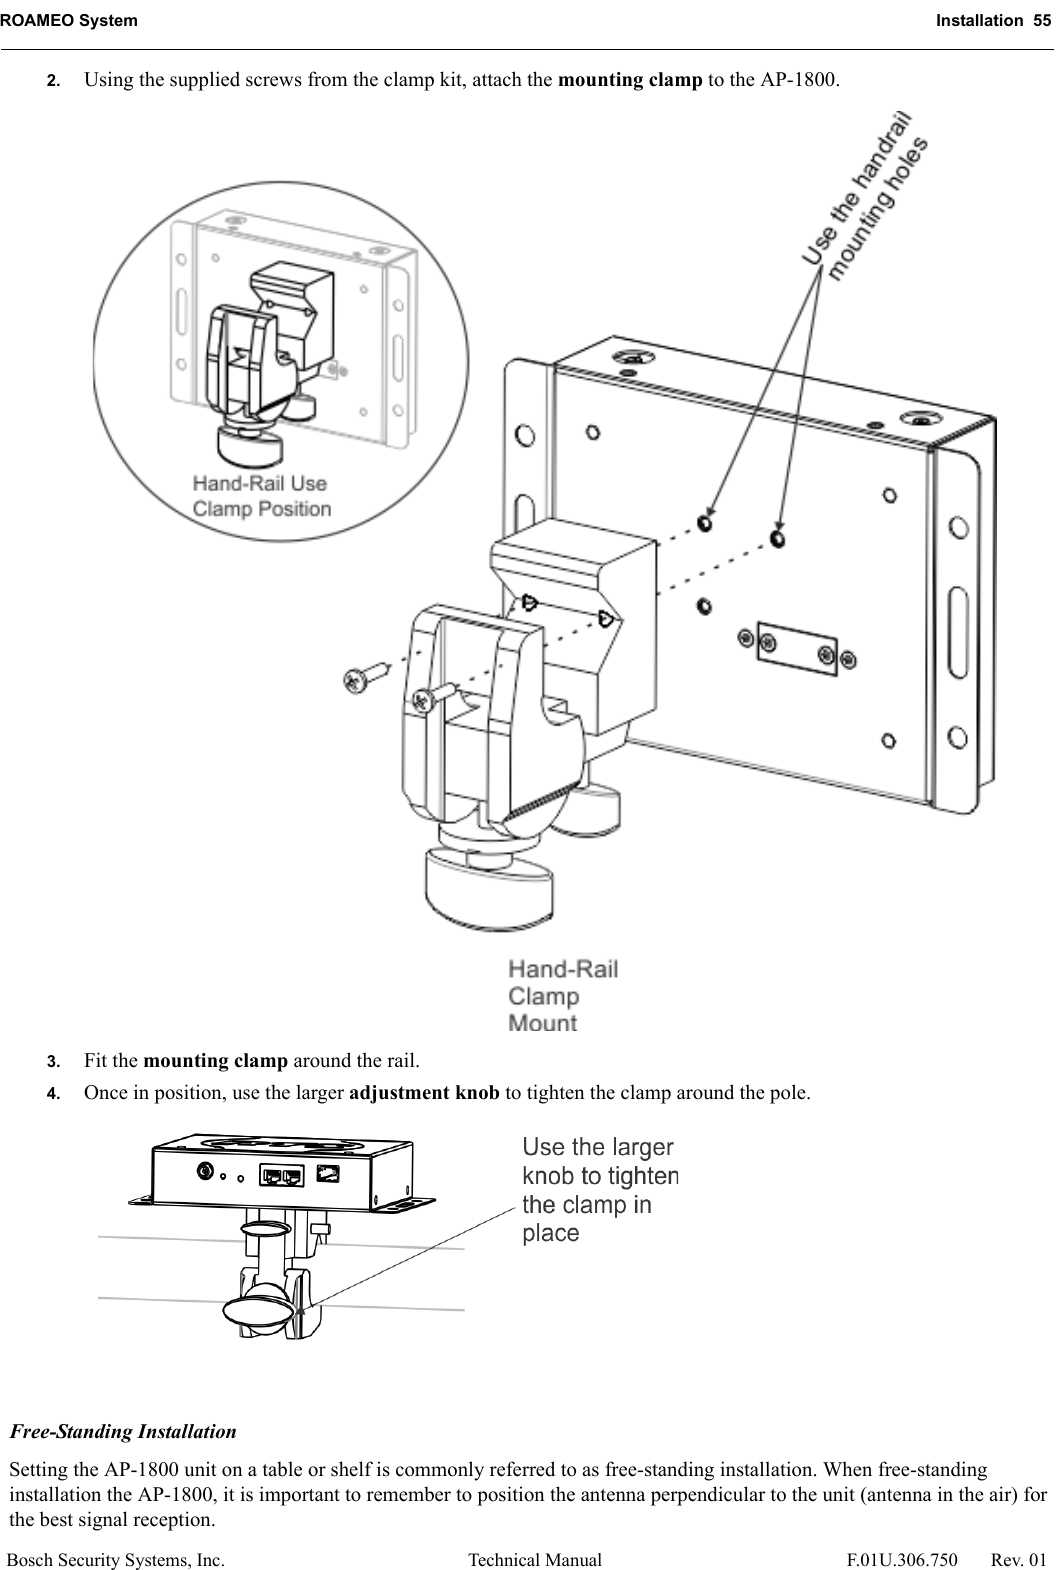 ROAMEO System Installation  55Bosch Security Systems, Inc. Technical Manual  F.01U.306.750 Rev. 012. Using the supplied screws from the clamp kit, attach the mounting clamp to the AP-1800. 3. Fit the mounting clamp around the rail. 4. Once in position, use the larger adjustment knob to tighten the clamp around the pole. Free-Standing InstallationSetting the AP-1800 unit on a table or shelf is commonly referred to as free-standing installation. When free-standing installation the AP-1800, it is important to remember to position the antenna perpendicular to the unit (antenna in the air) for the best signal reception.